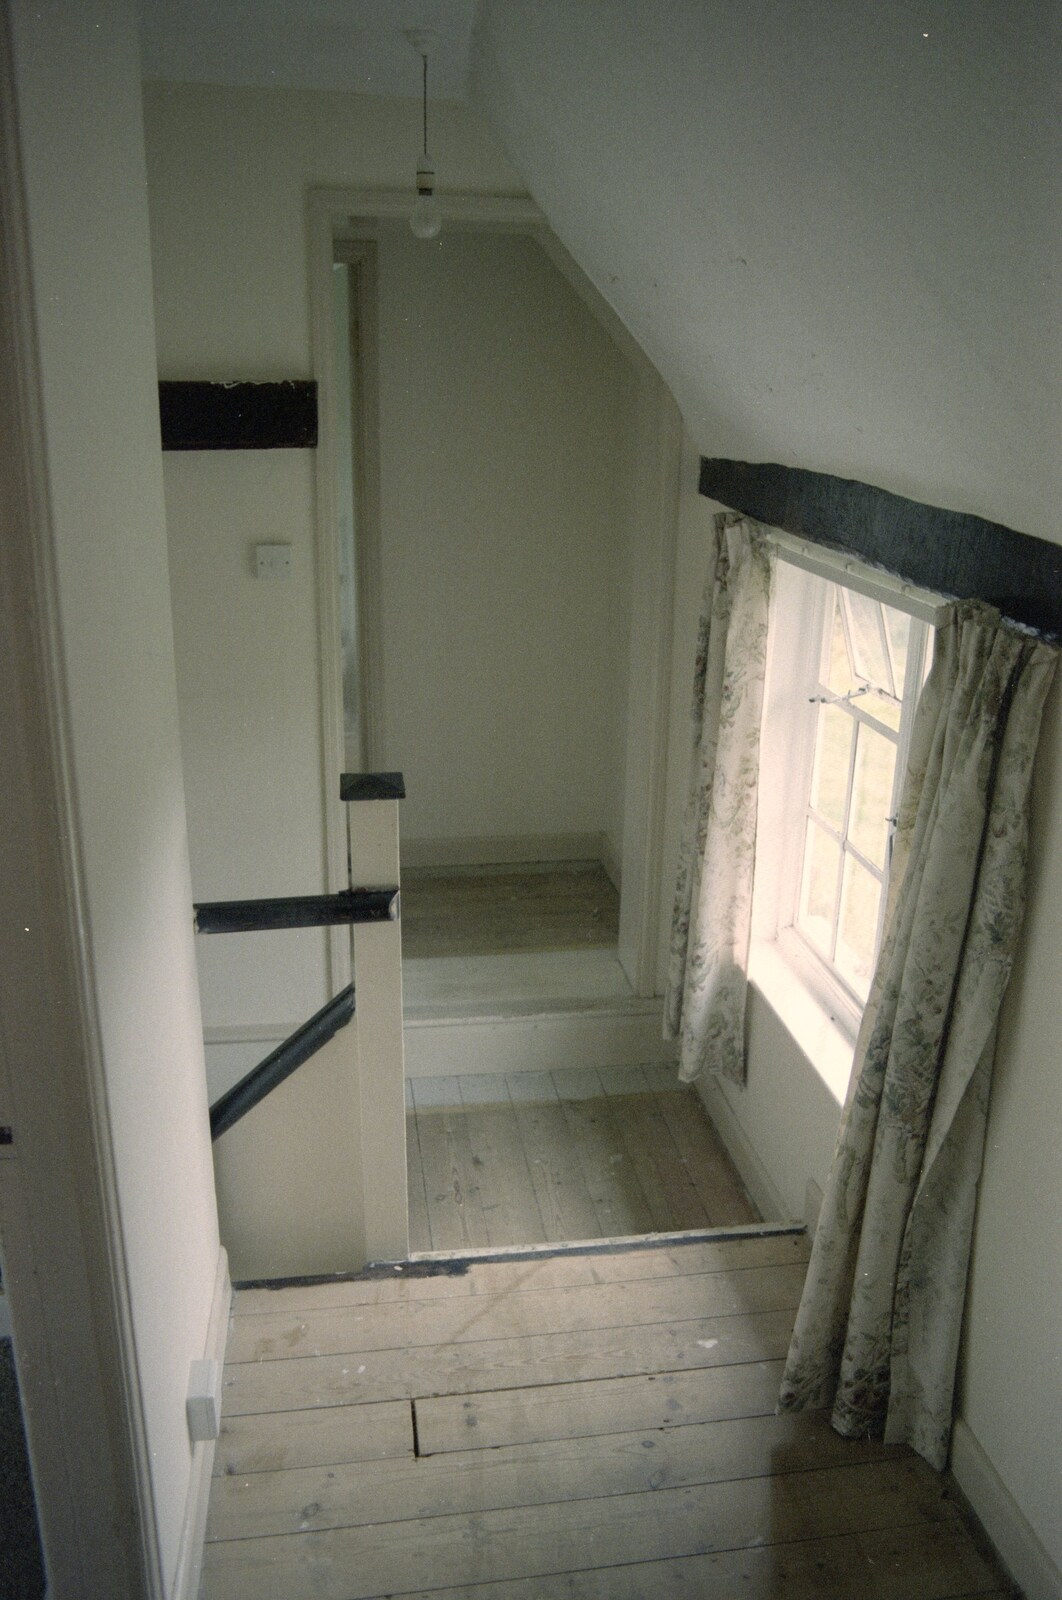 The upstairs landing from Moving In, Brome, Suffolk - 10th April 1994